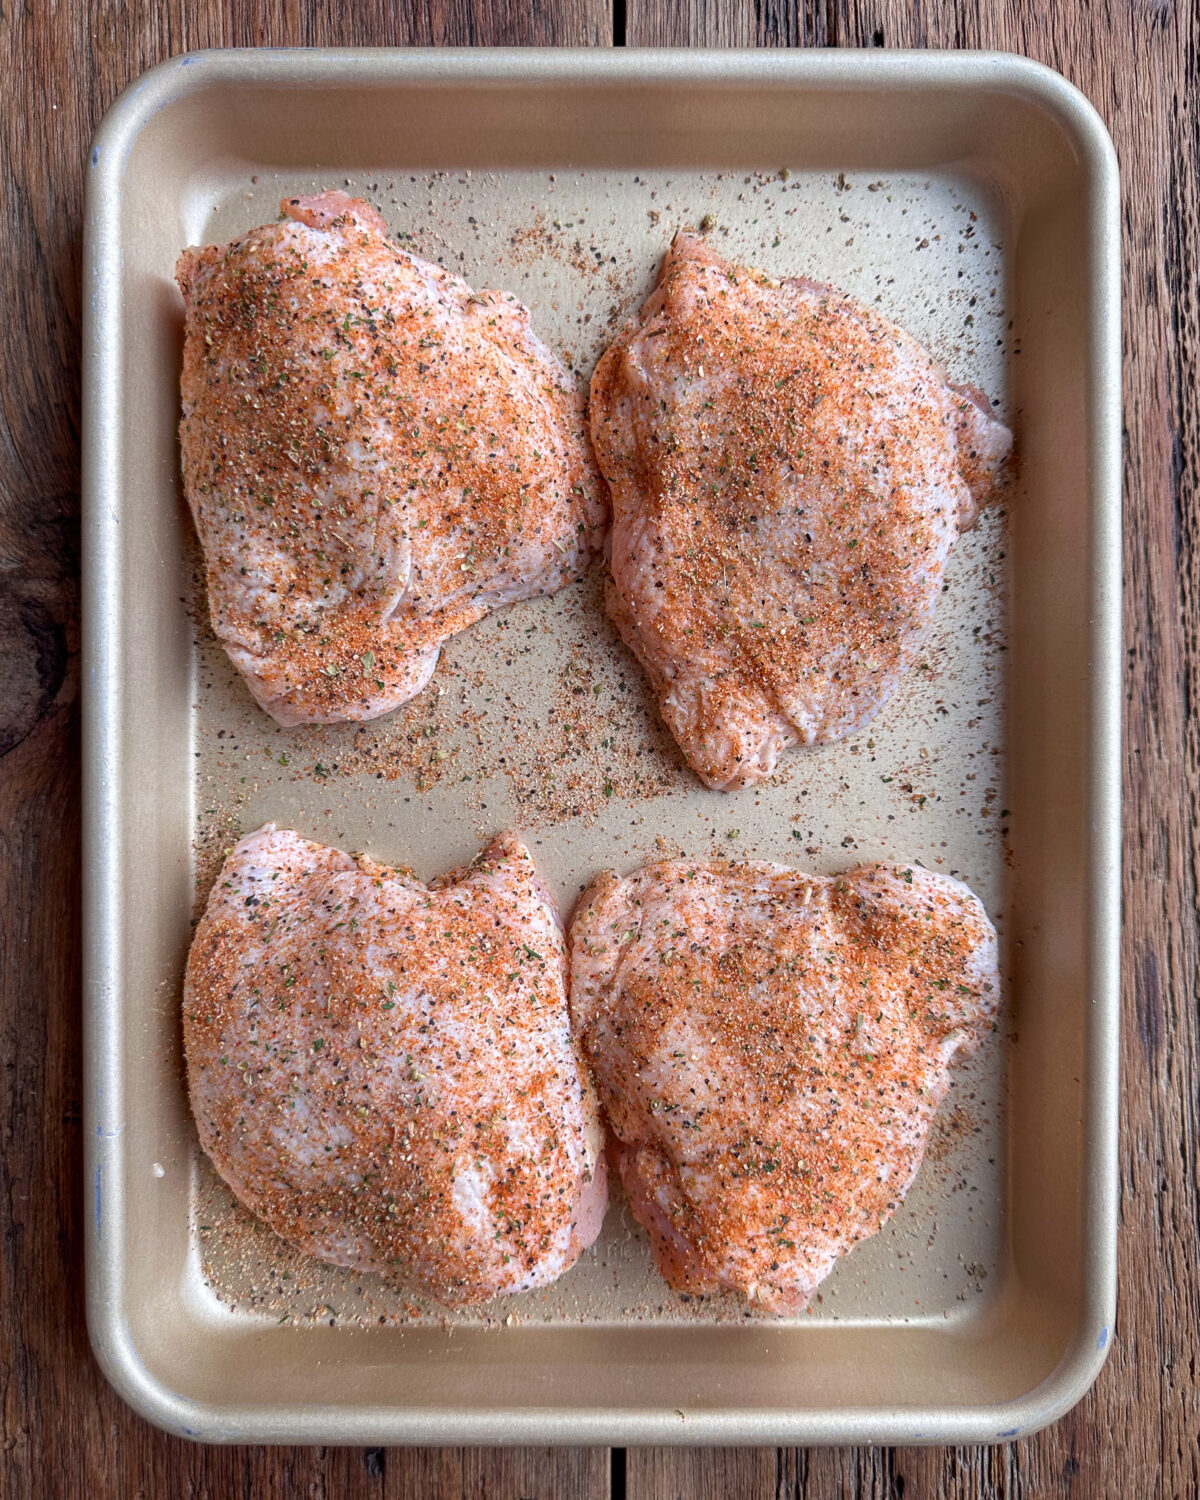 Four bone-in, skin on chicken thighs liberally seasoned with a dry rub before going into the airfryer.